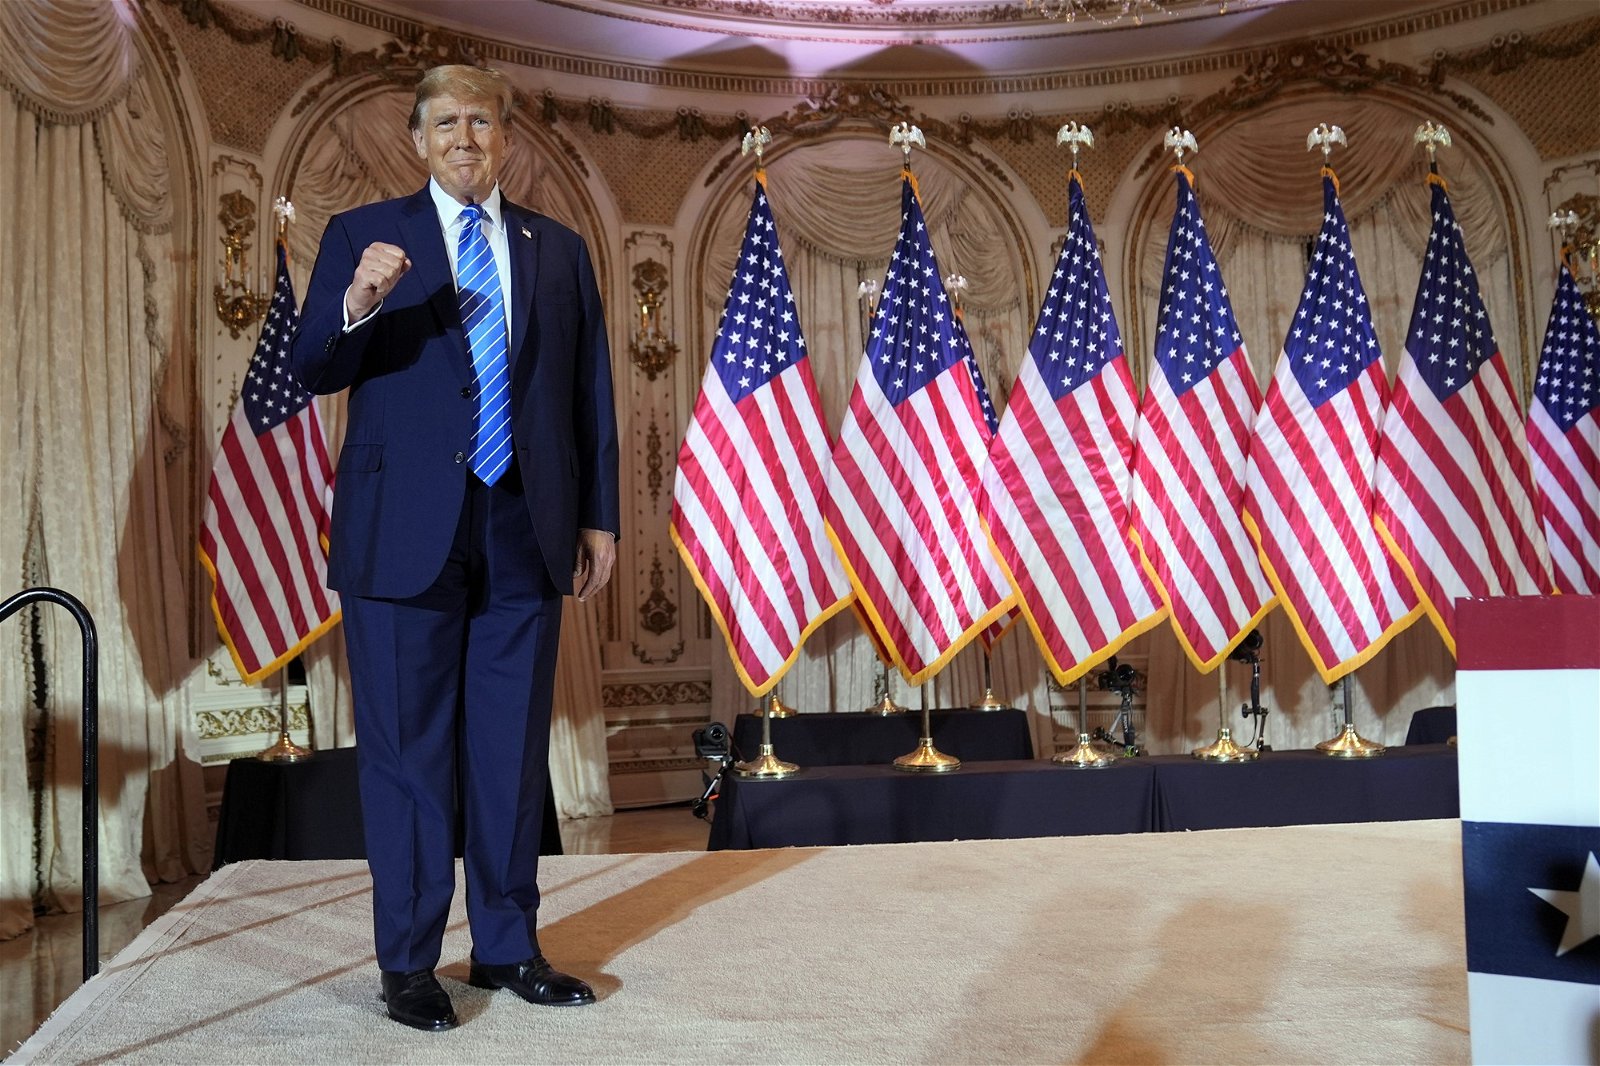 Donald Trump stands on a stage in front of a row of American flags. He is wearing a suit and holding up a fist.